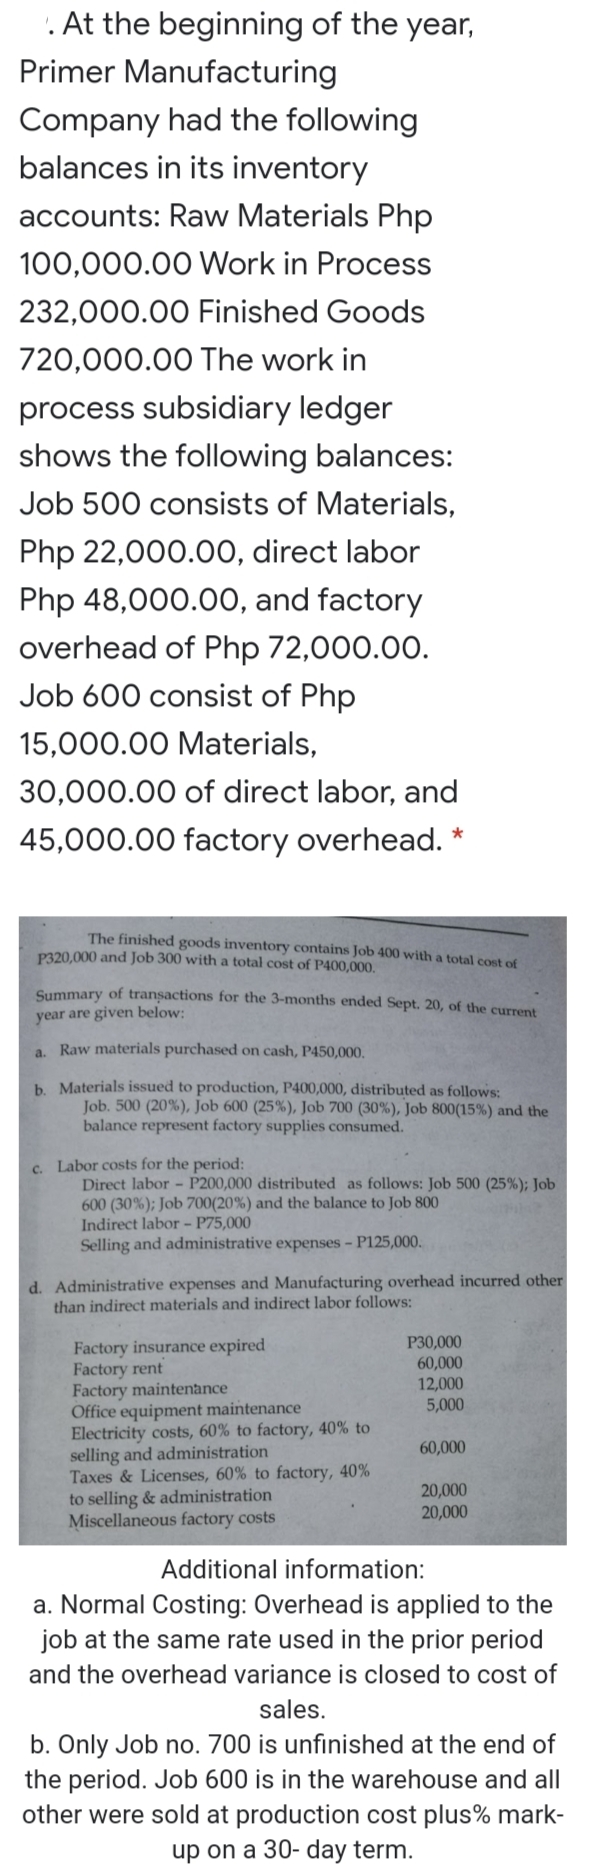 '. At the beginning of the year,
Primer Manufacturing
Company had the following
balances in its inventory
accounts: Raw Materials Php
100,000.00 Work in Process
232,000.00 Finished Goods
720,000.00 The work in
process subsidiary ledger
shows the following balances:
Job 500 consists of Materials,
Php 22,000.0O, direct labor
Php 48,000.00, and factory
overhead of Php 72,000.00.
Job 600 consist of Php
15,000.00 Materials,
30,000.00 of direct labor, and
45,000.00 factory overhead. *
The finished goods inventory contains Job 400 with a total cost of
P320,000 and Job 300 with a total cost of P400,000.
Summary of transactions for the 3-months ended Sept. 20, of the current
year are given below:
a. Raw materials purchased on cash, P450,000.
b. Materials issued to production, P400,000, distributed as follows:
Job. 500 (20%), Job 600 (25%), Job 700 (30%), Job 800(15%) and the
balance represent factory supplies consumed.
c. Labor costs for the period:
Direct labor - P200,000 distributed as follows: Job 500 (25%); Job
600 (30%); Job 700(20%) and the balance to Job 800
Indirect labor - P75,000
Selling and administrative expenses - P125,000.
d. Administrative expenses and Manufacturing overhead incurred other
than indirect materials and indirect labor follows:
P30,000
60,000
12,000
5,000
Factory insurance expired
Factory rent
Factory maintenance
Office equipment maintenance
Electricity costs, 60% to factory, 40% to
selling and administration
Taxes & Licenses, 60% to factory, 40%
to selling & administration
Miscellaneous factory costs
60,000
20,000
20,000
Additional information:
a. Normal Costing: Overhead is applied to the
job at the same rate used in the prior period
and the overhead variance is closed to cost of
sales.
b. Only Job no. 700 is unfinished at the end of
the period. Job 600 is in the warehouse and all
other were sold at production cost plus% mark-
up on a 30- day term.
